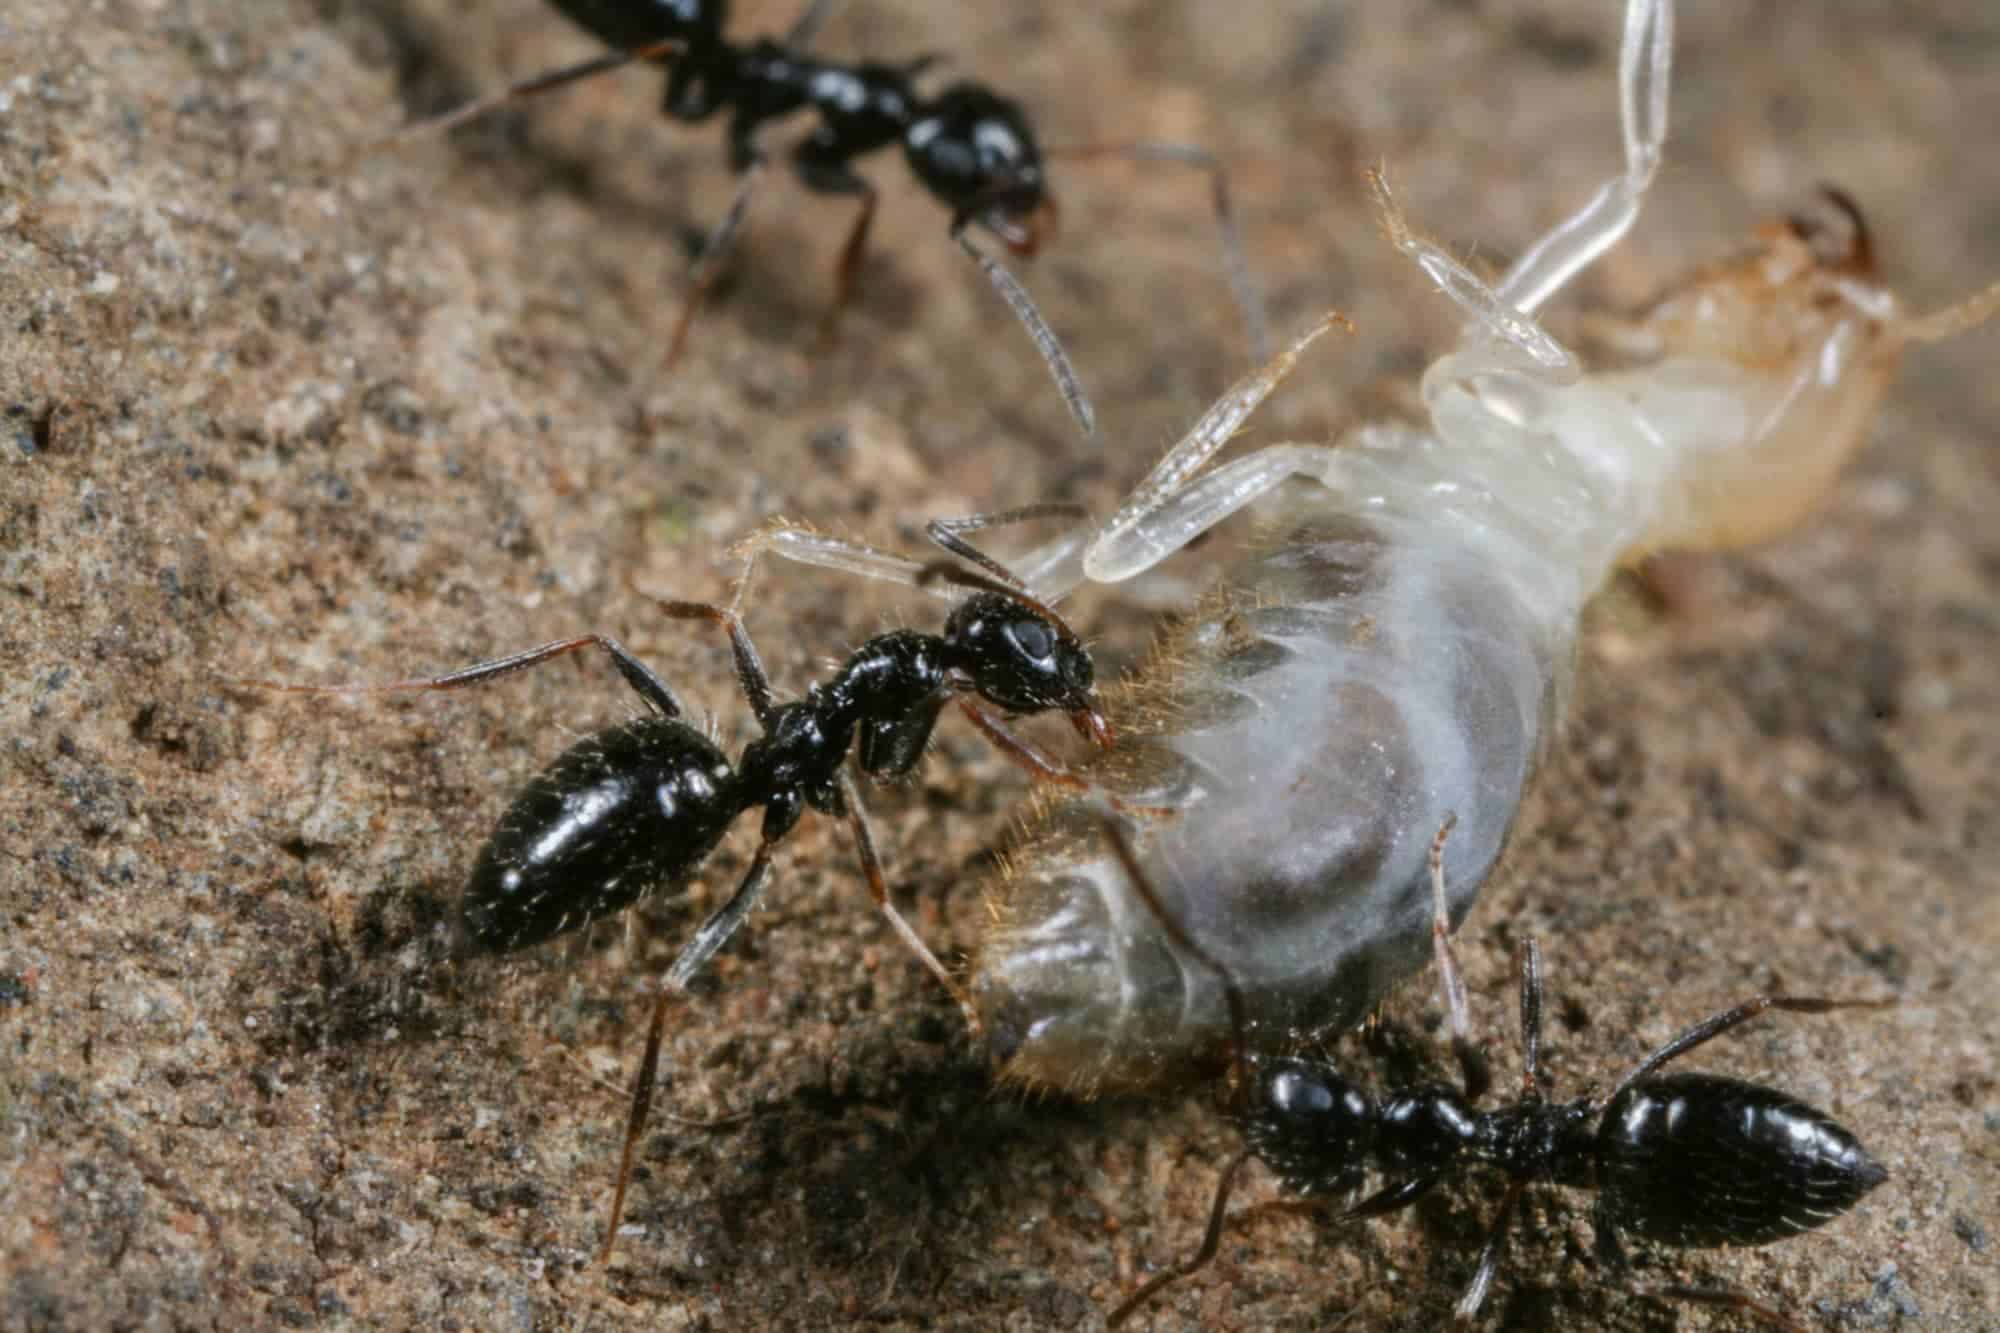 Find out what kind of ants you’re dealing with